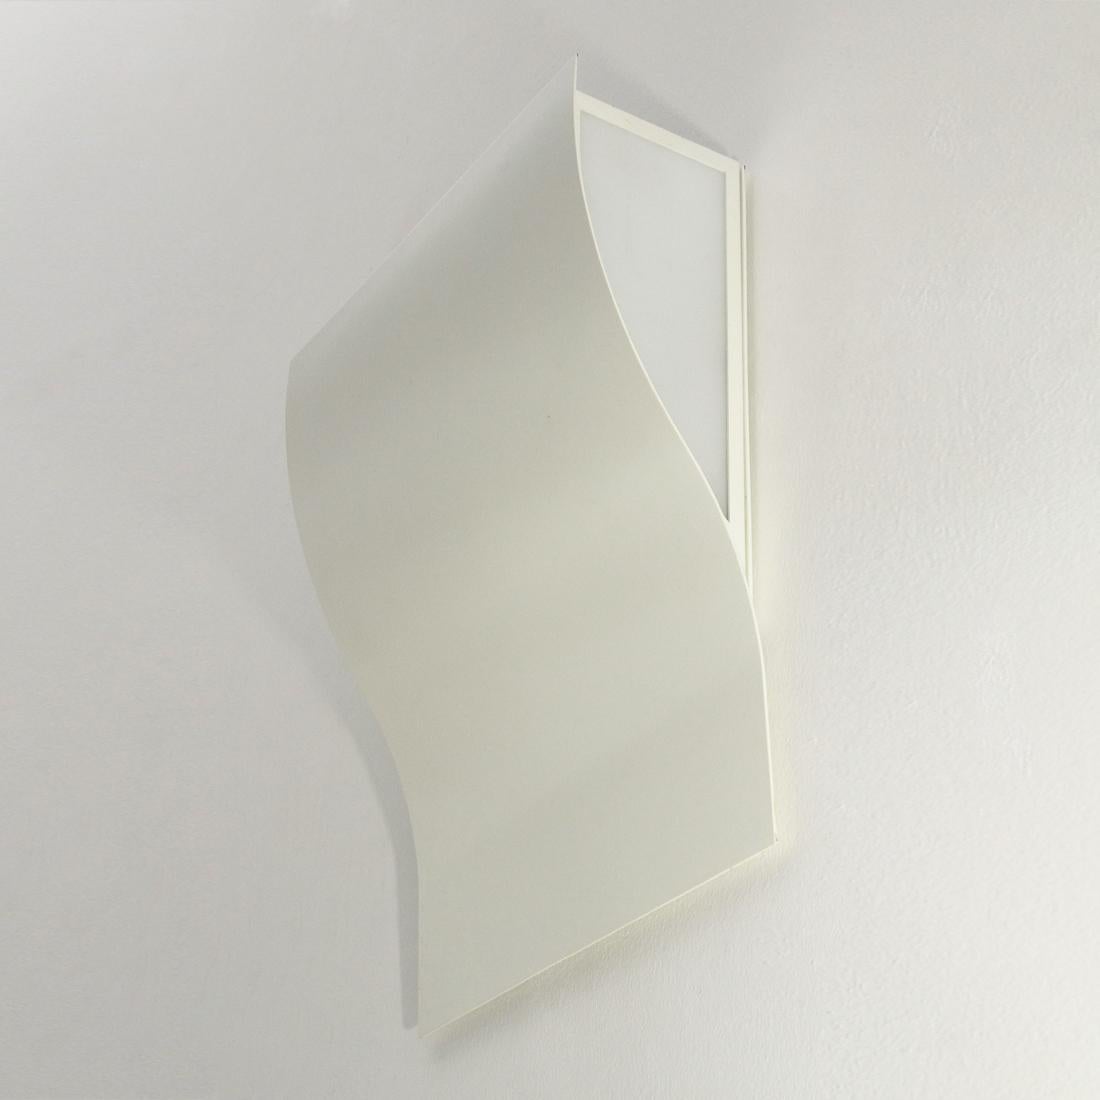 Mid-Century Modern 'Moki' wall lamp by Eugenio and Andrea Pamio for Oty Light, 2000s For Sale